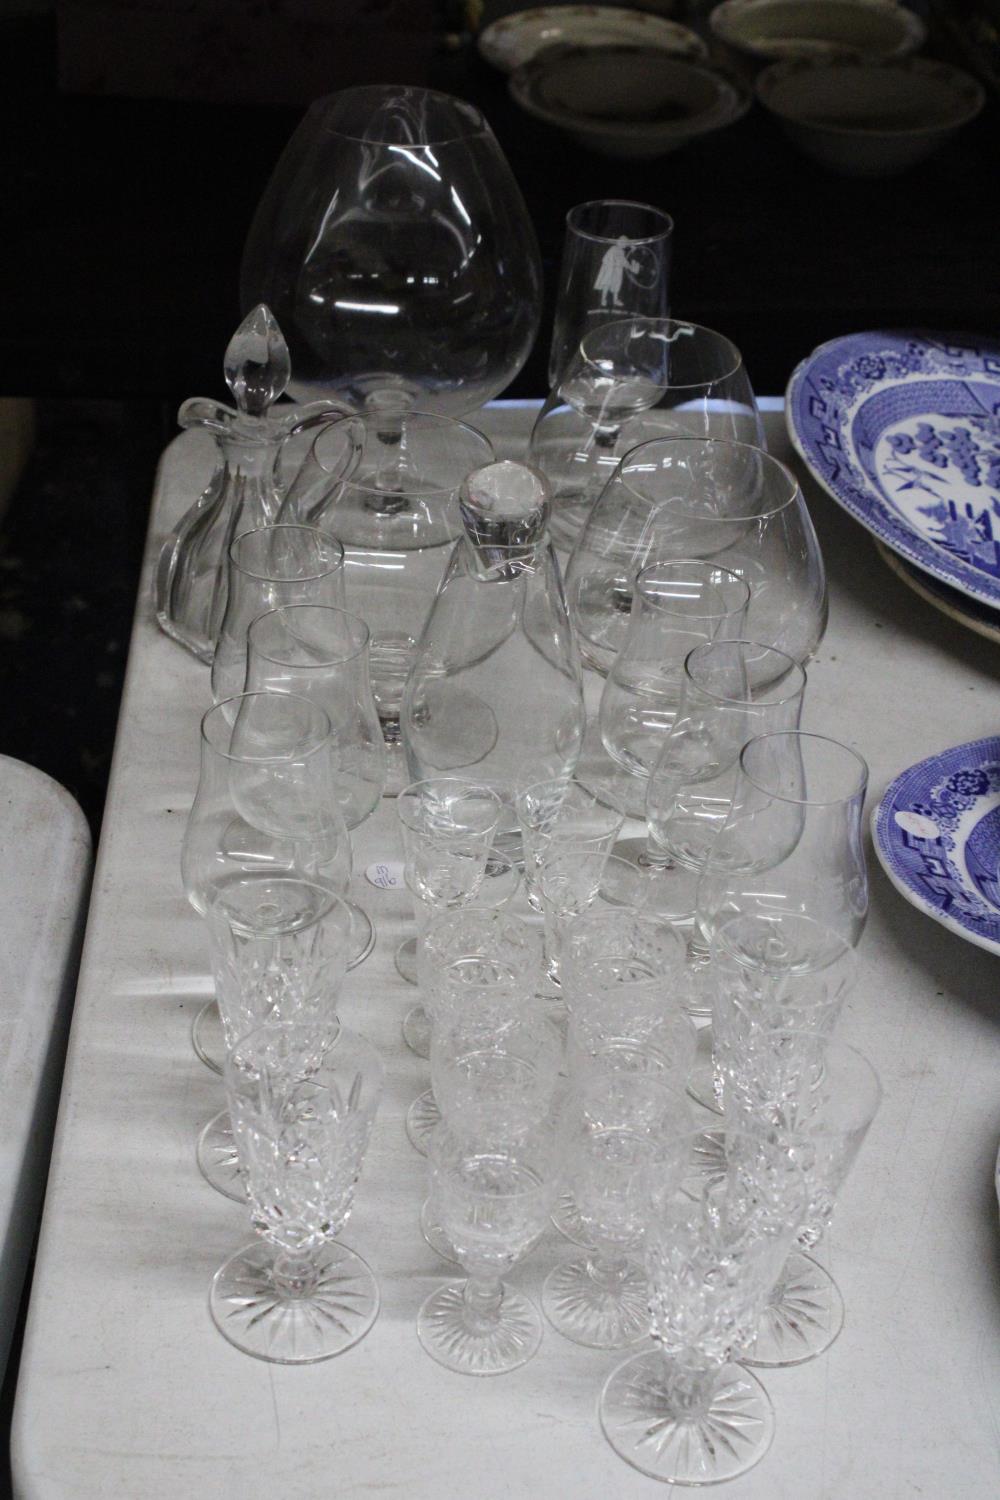 A MIXED LOT OF GLASSWARE TO INCLUDE BRANDY GLASSES, SHERRY GLASSES, A GLASS LIDDED OIL BOTTLE ETC